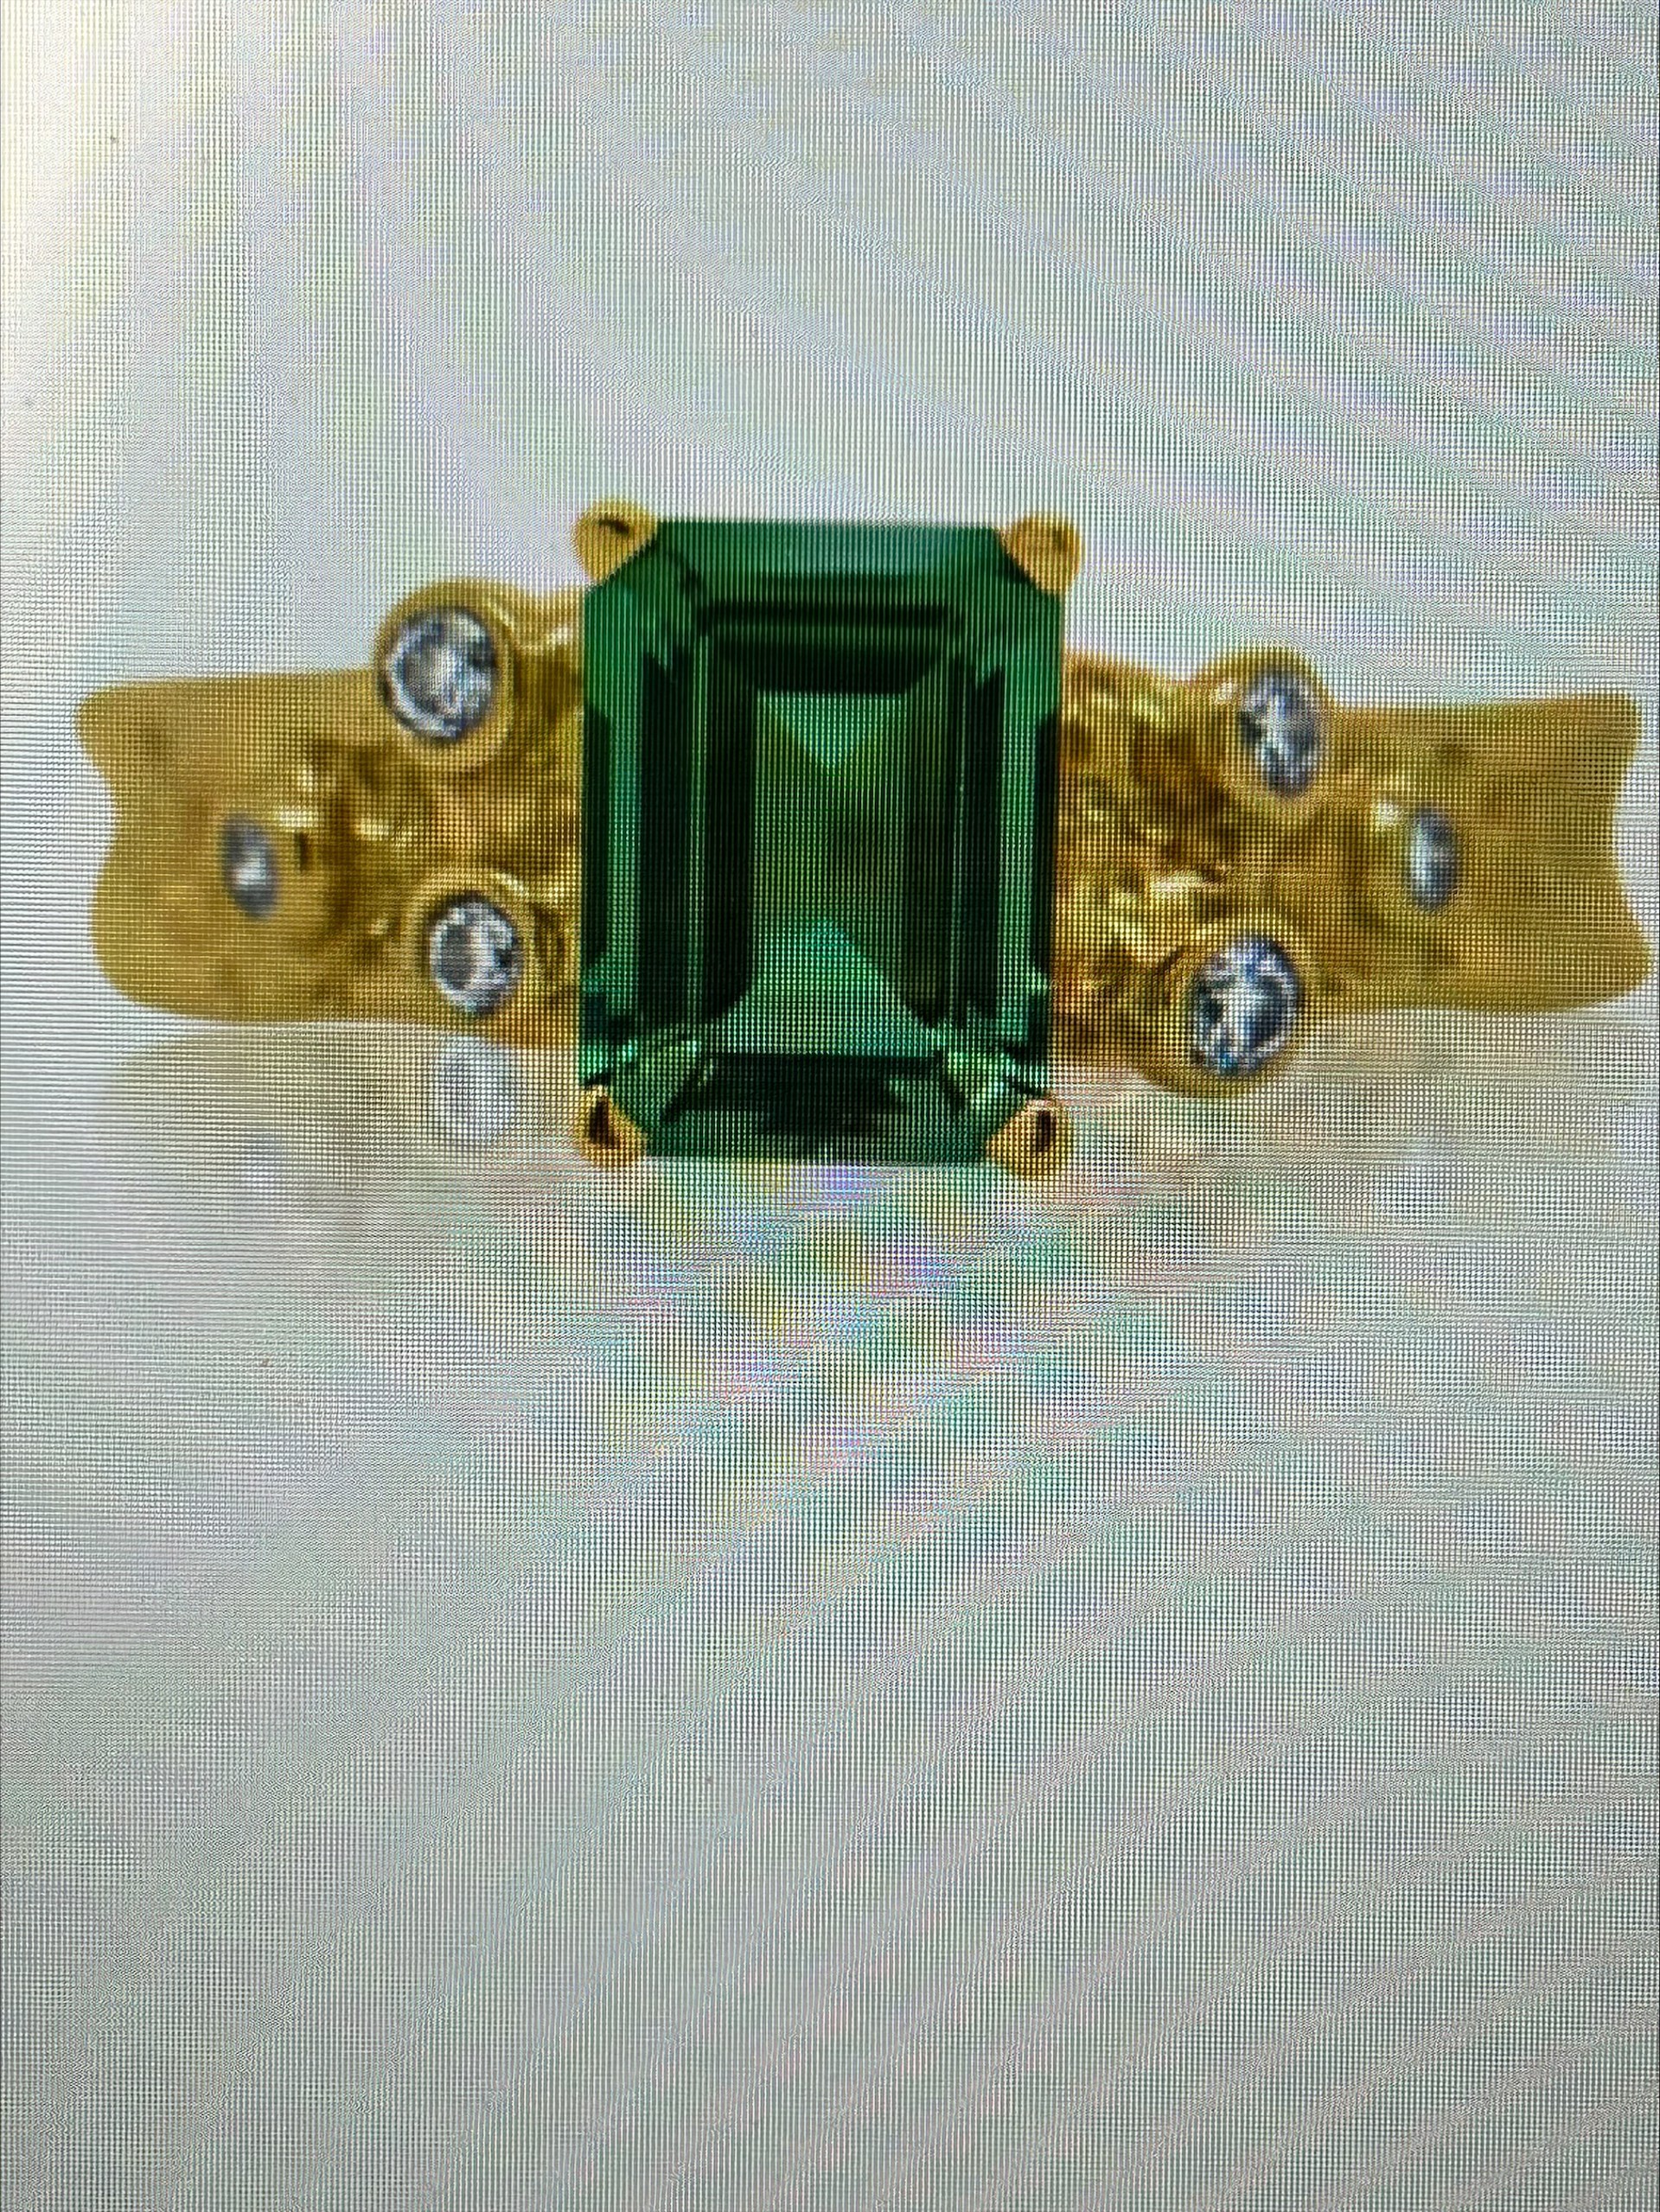 Twinkle in the sky-18k gold & diamond square cut emerald ring by Kristen Baird